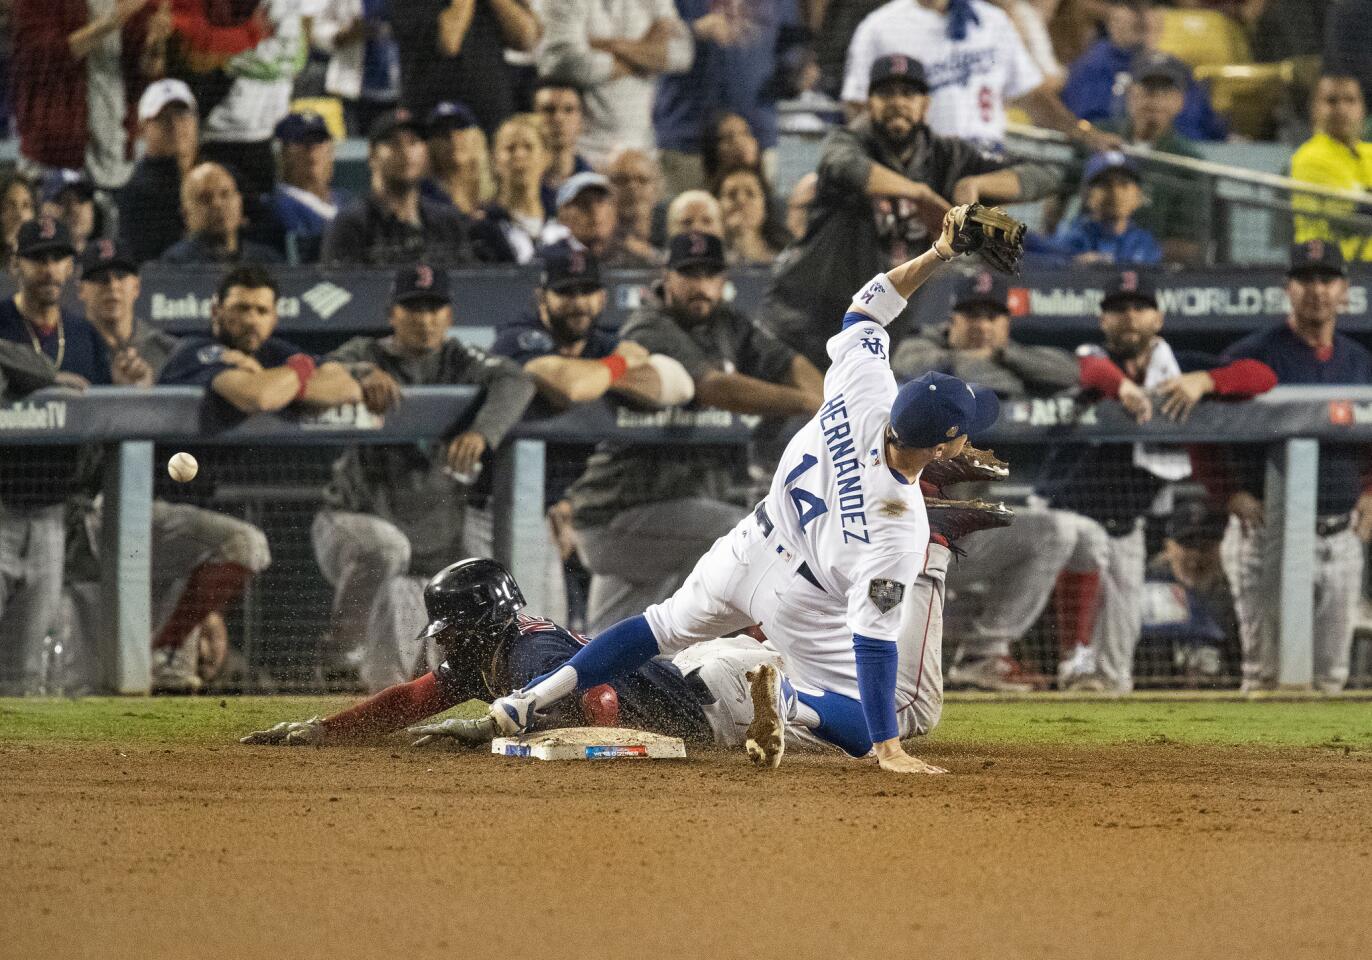 Red Sox third baseman Eduardo Nunez slides safely into first base as Dodgers second baseman Enrique Hernandez can't handle the throw from relief pitcher Scott Alexander allowing the go-ahead run to score in the 13th inning.